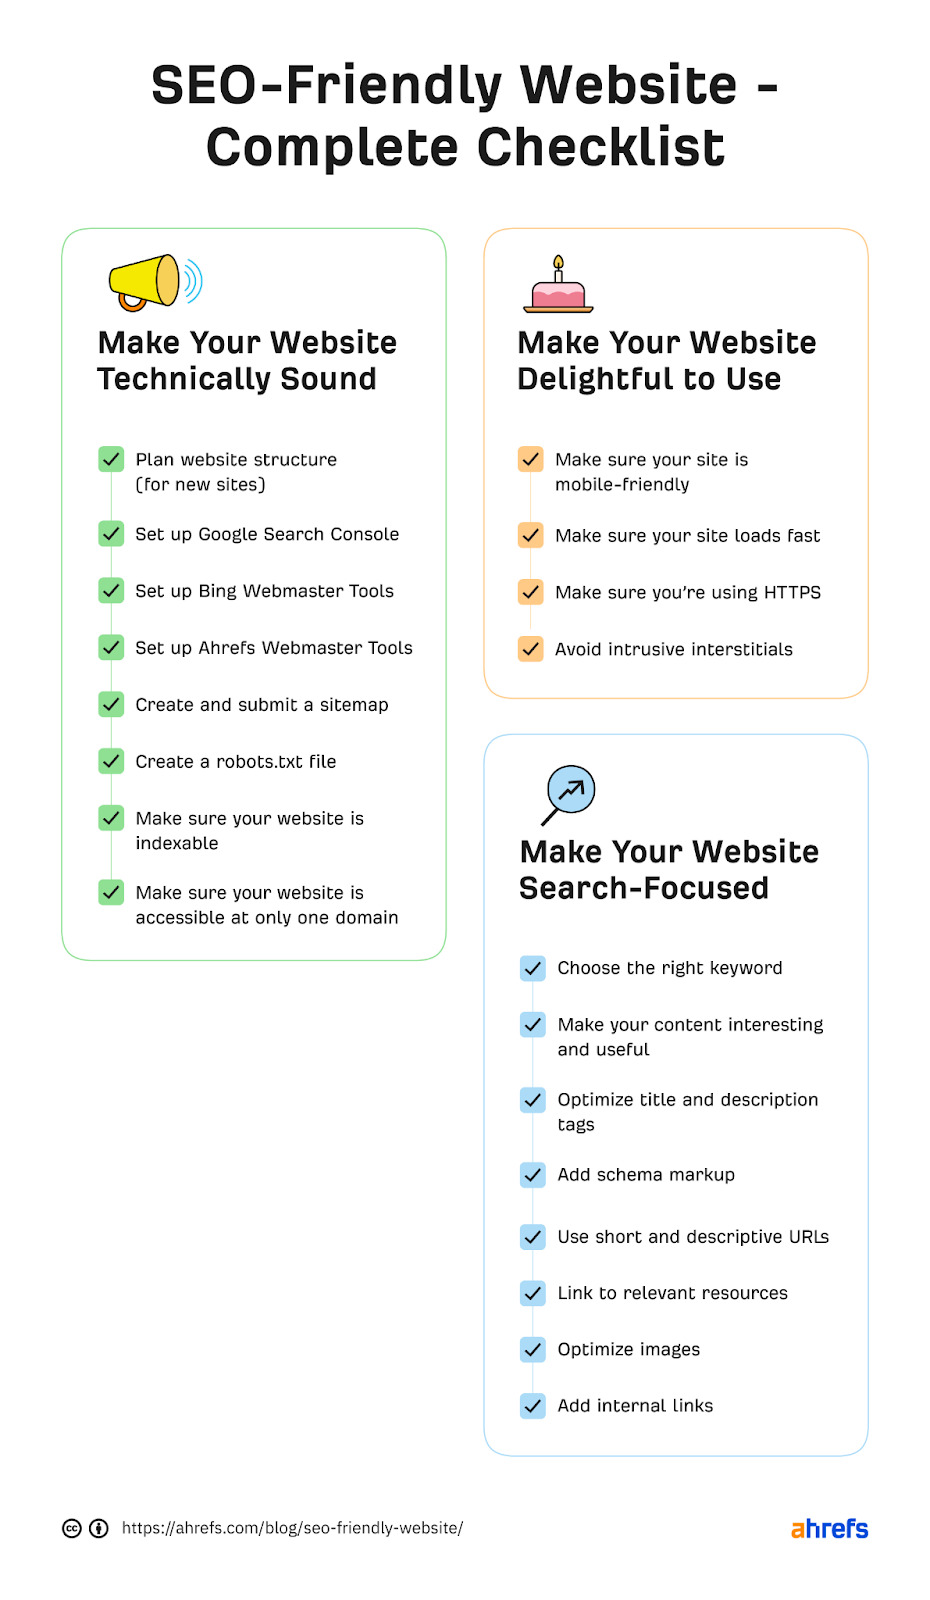 Complete checklist of the various things that make up an SEO-friendly website 